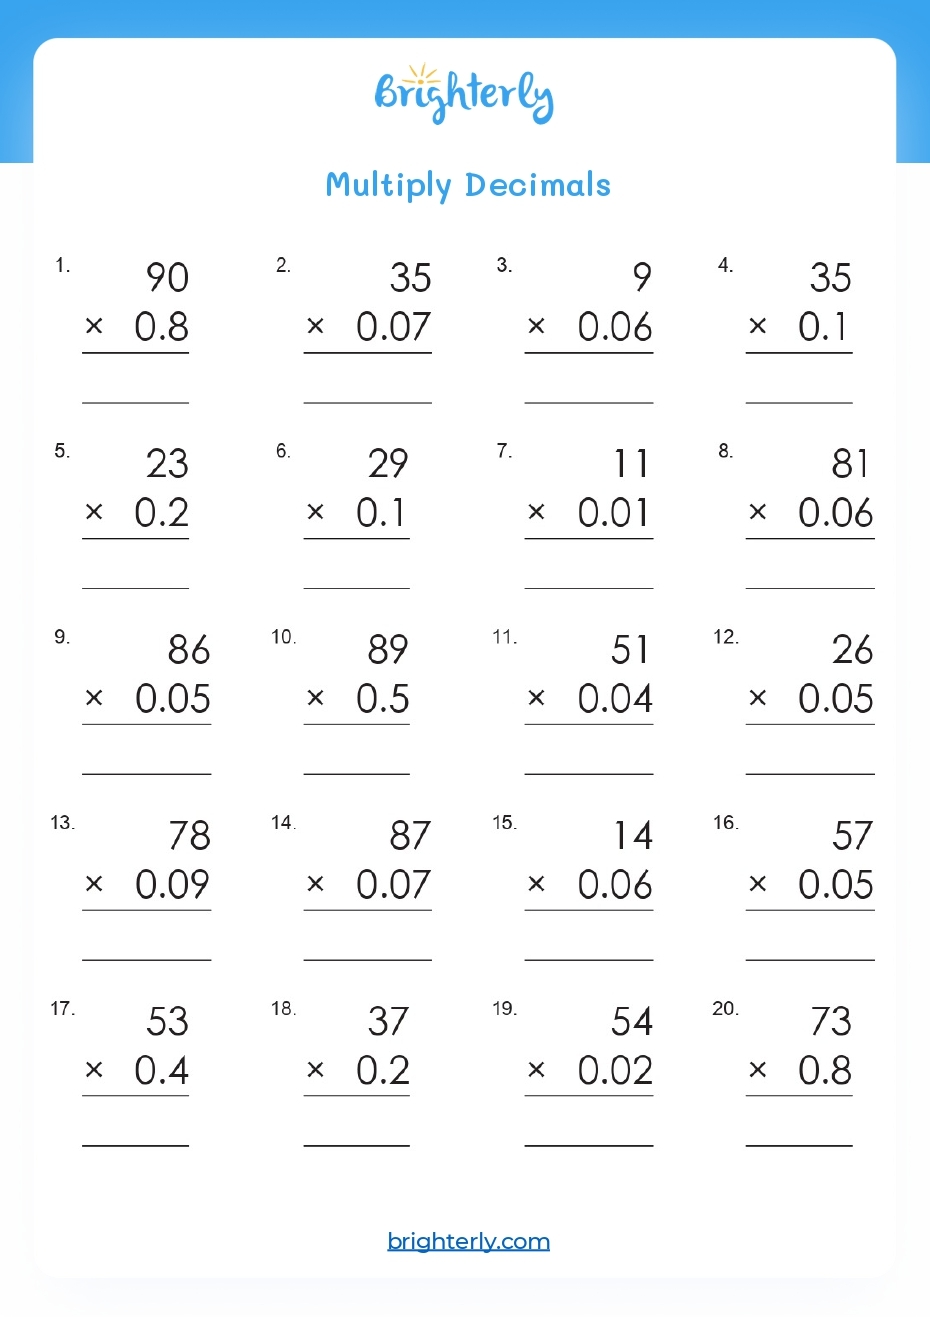 Multiplying Decimals Worksheet With Answers Pdf